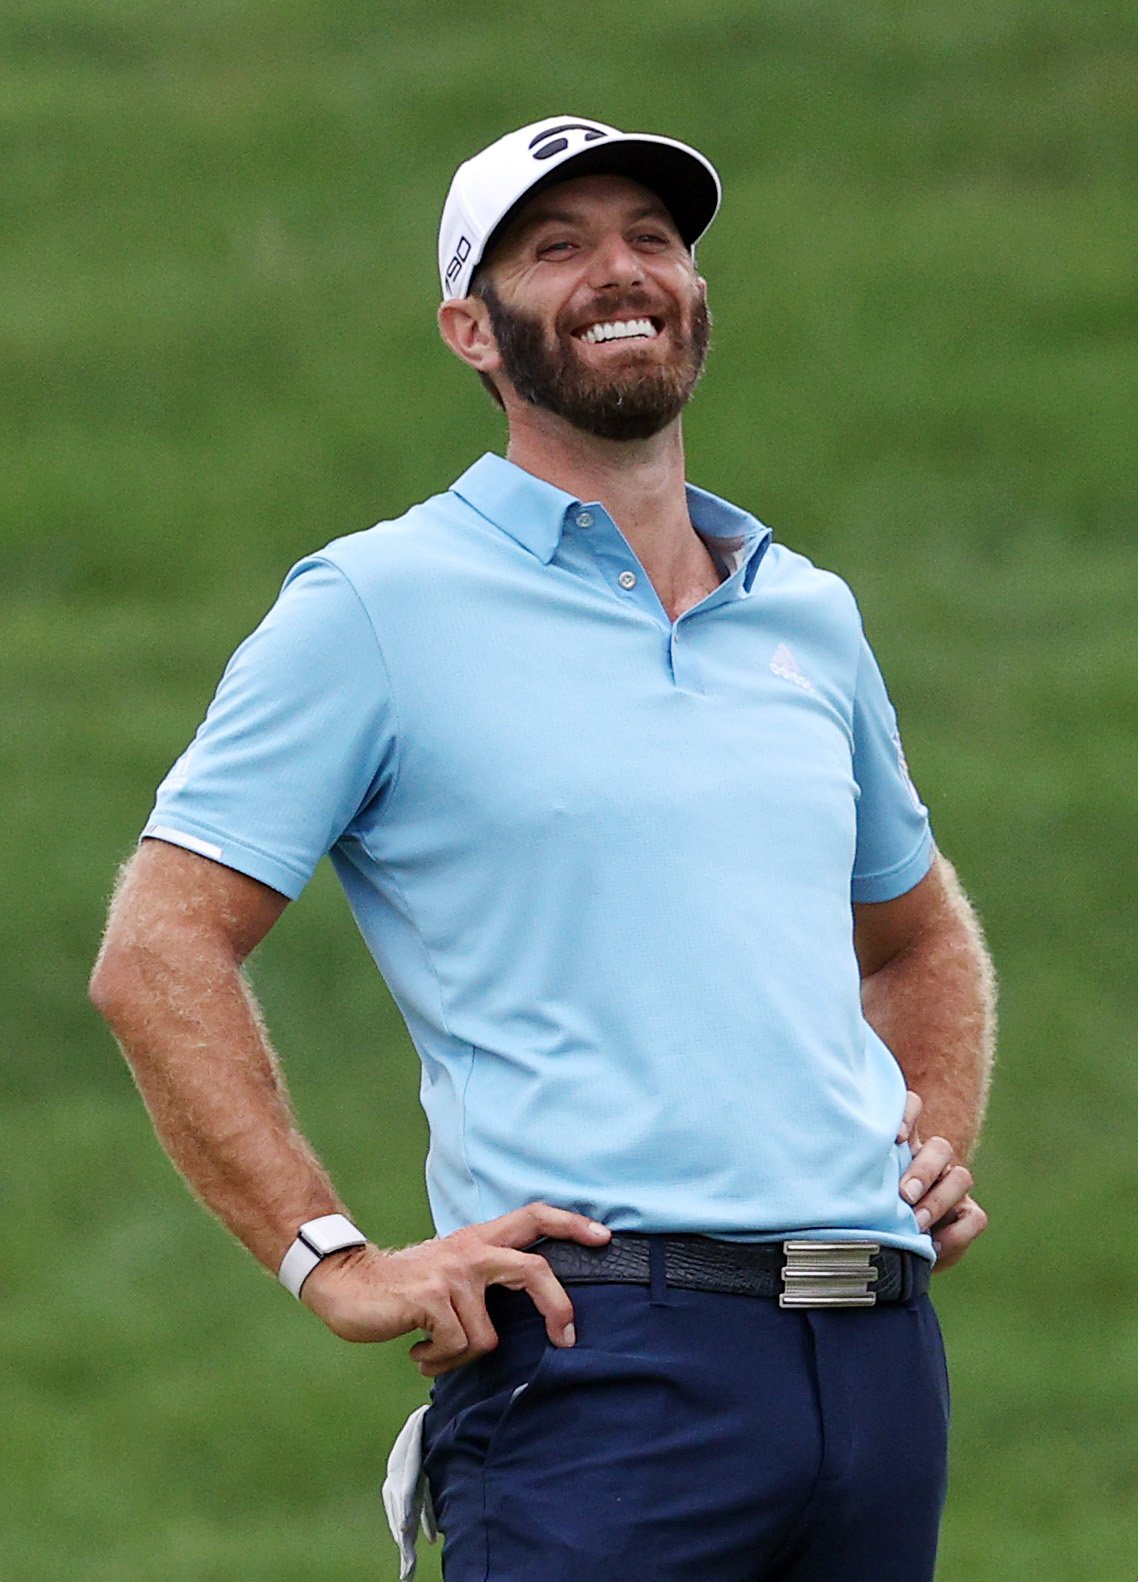 Dustin Johnson plays at the Travelers Championship on June 28, 2020, in Cromwell, Connecticut. | Source: Getty Images.